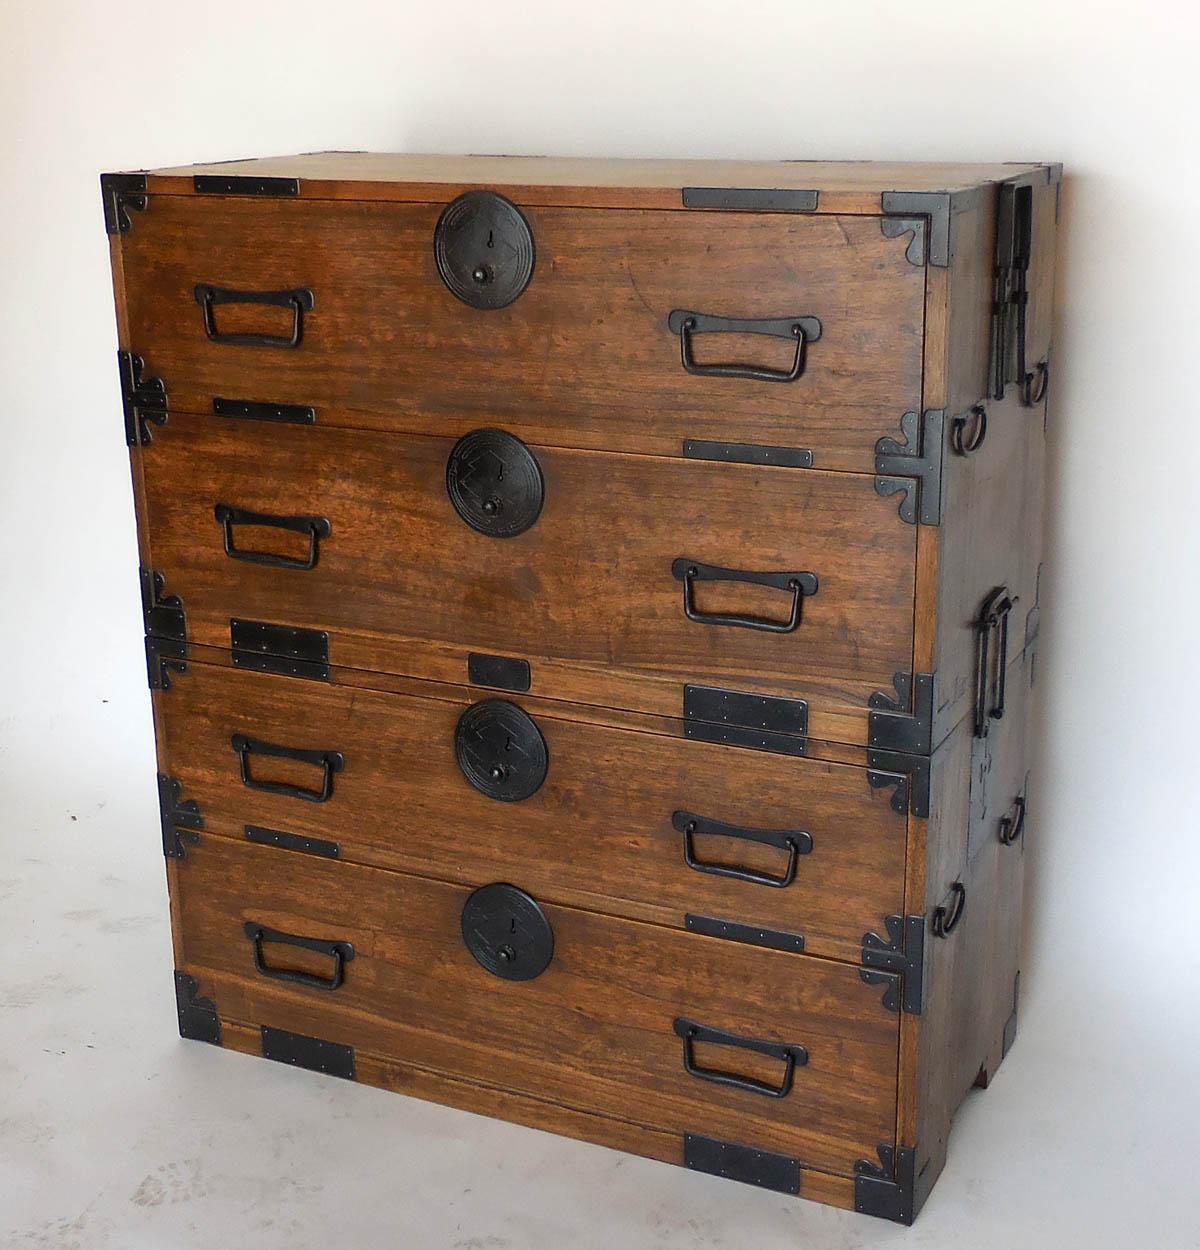 19th century Japanese double stacked (two tansus) with drawers. Can be separated into two separate pieces, and used separately. All original hardware, and bamboo nails. This was an old shop cabinet and each drawer has open handles on the inside for